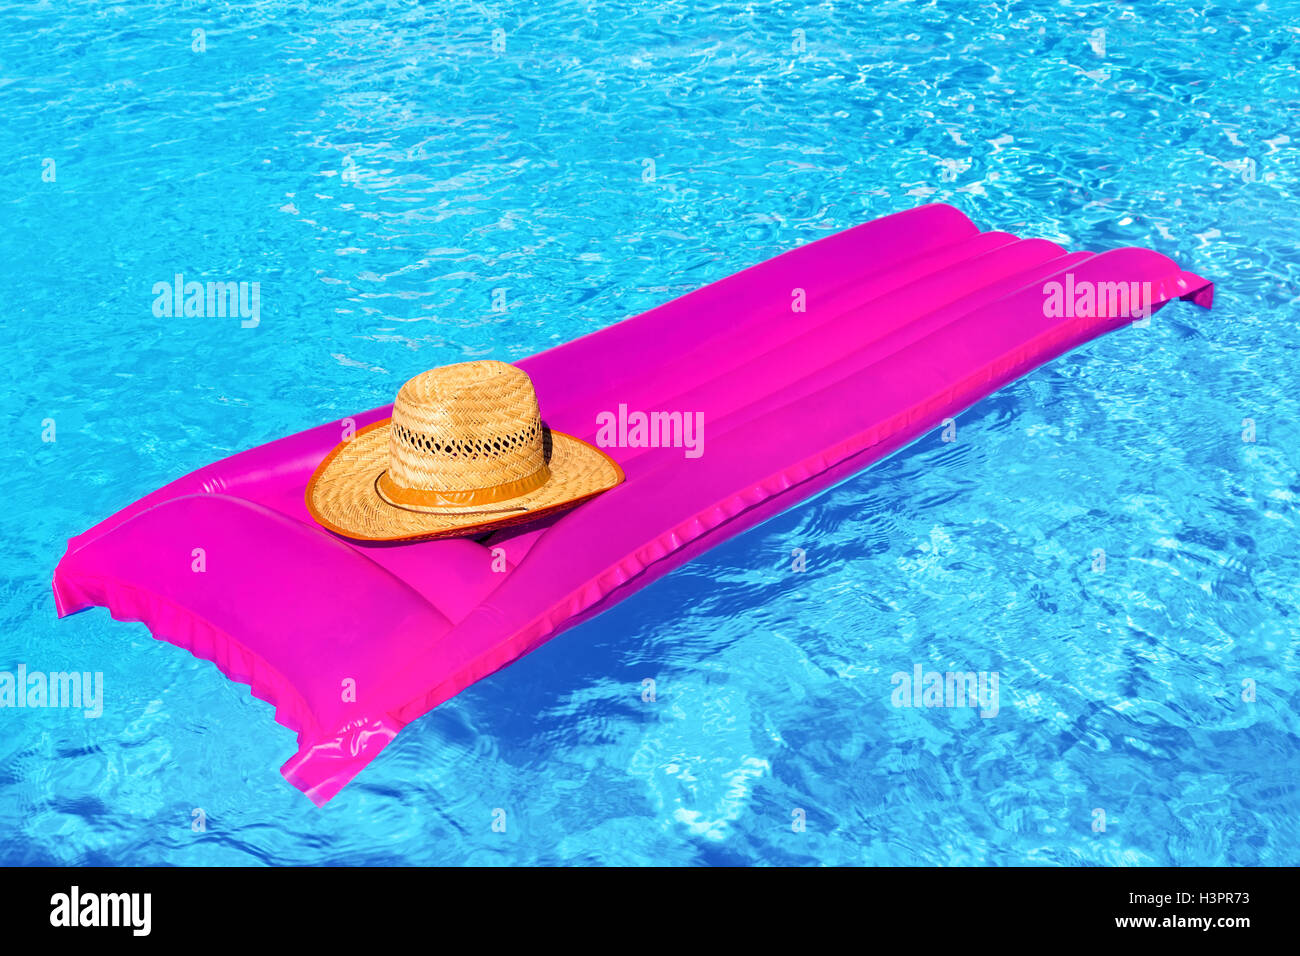 Pink air bed with straw hat in blue swimming pool Stock Photo